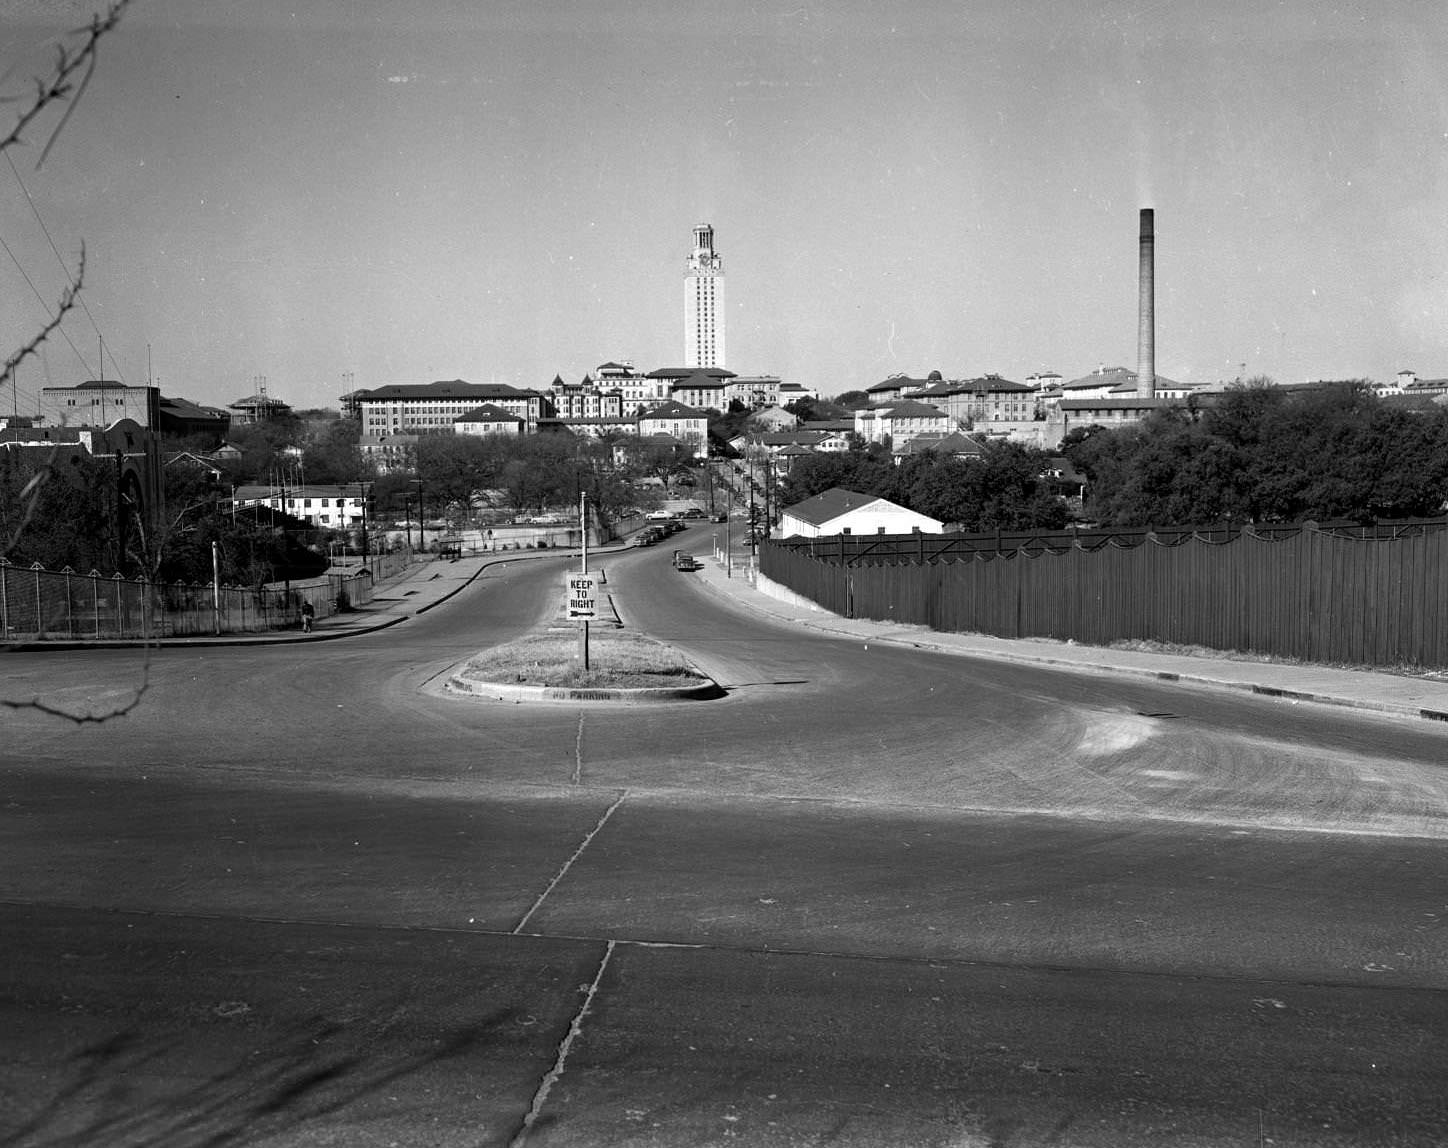 View of construction fencing to the north of the intersection of E. Campus Dr. and 23rd Street, 1951